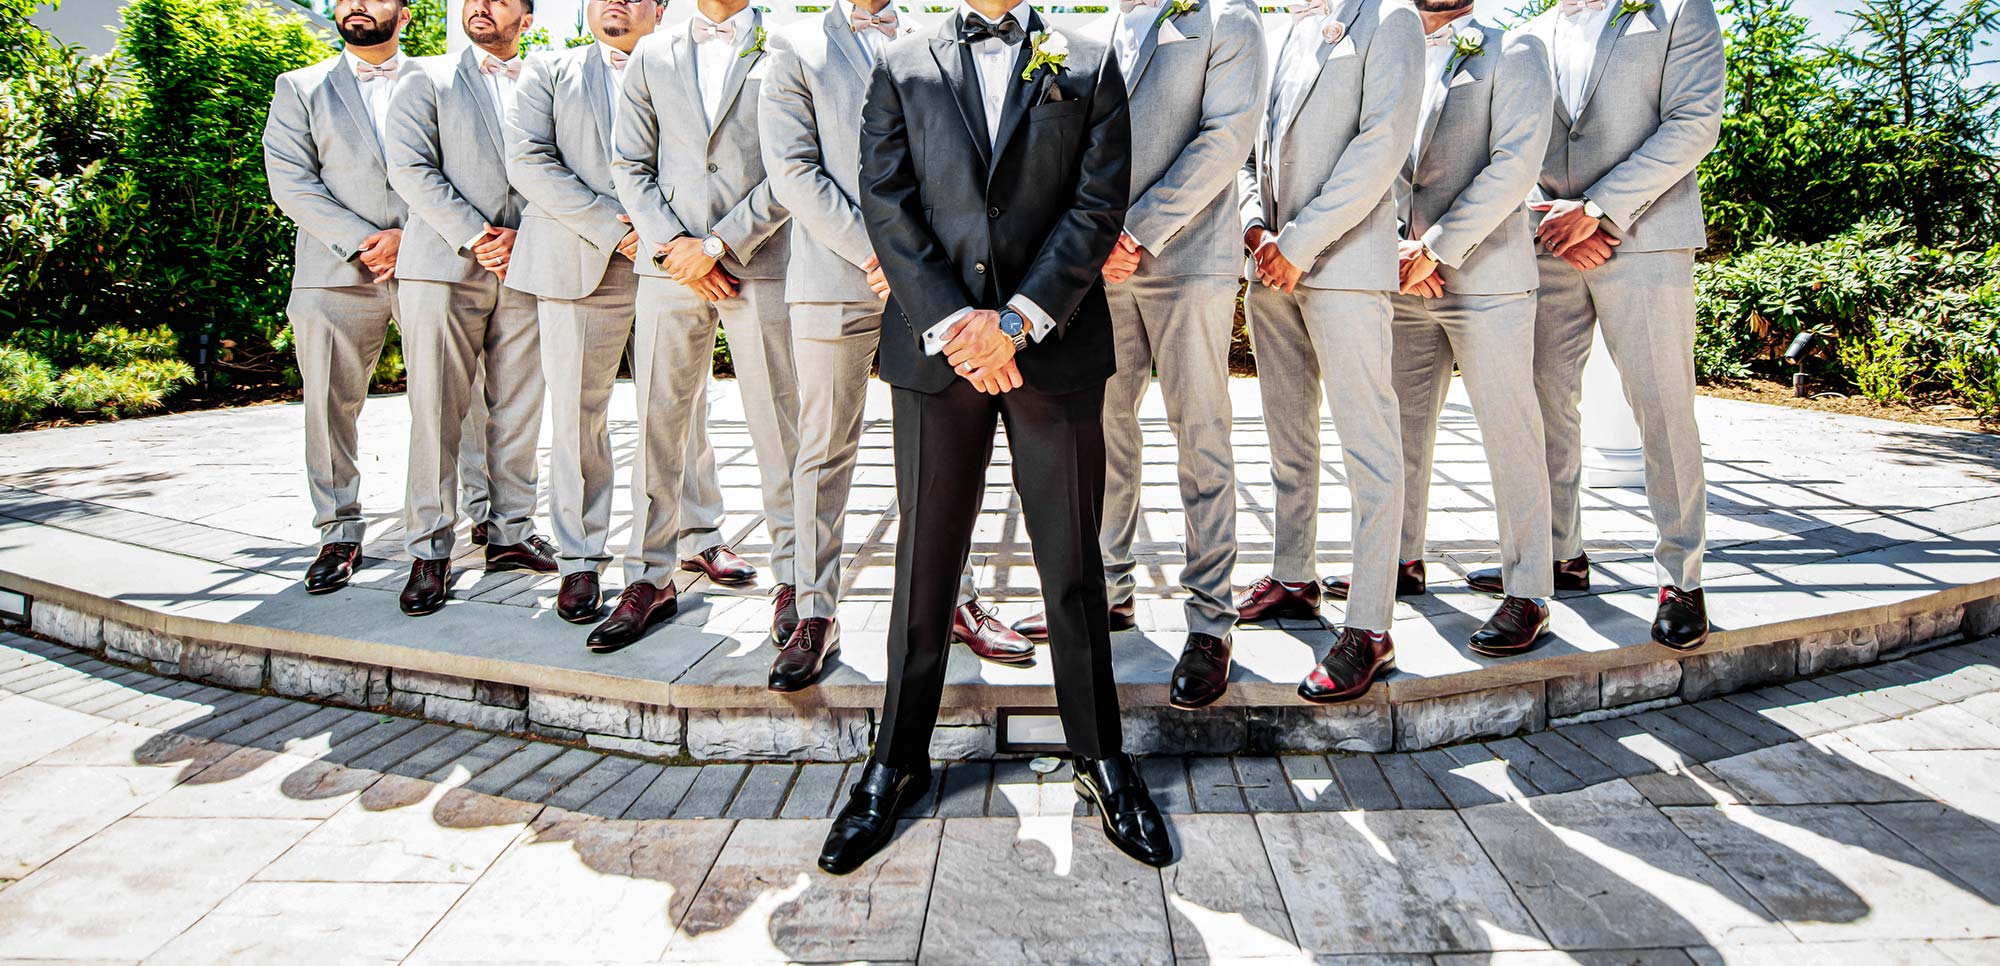 Groomsmen Proposal Ideas That’ll Make You the Real MVP